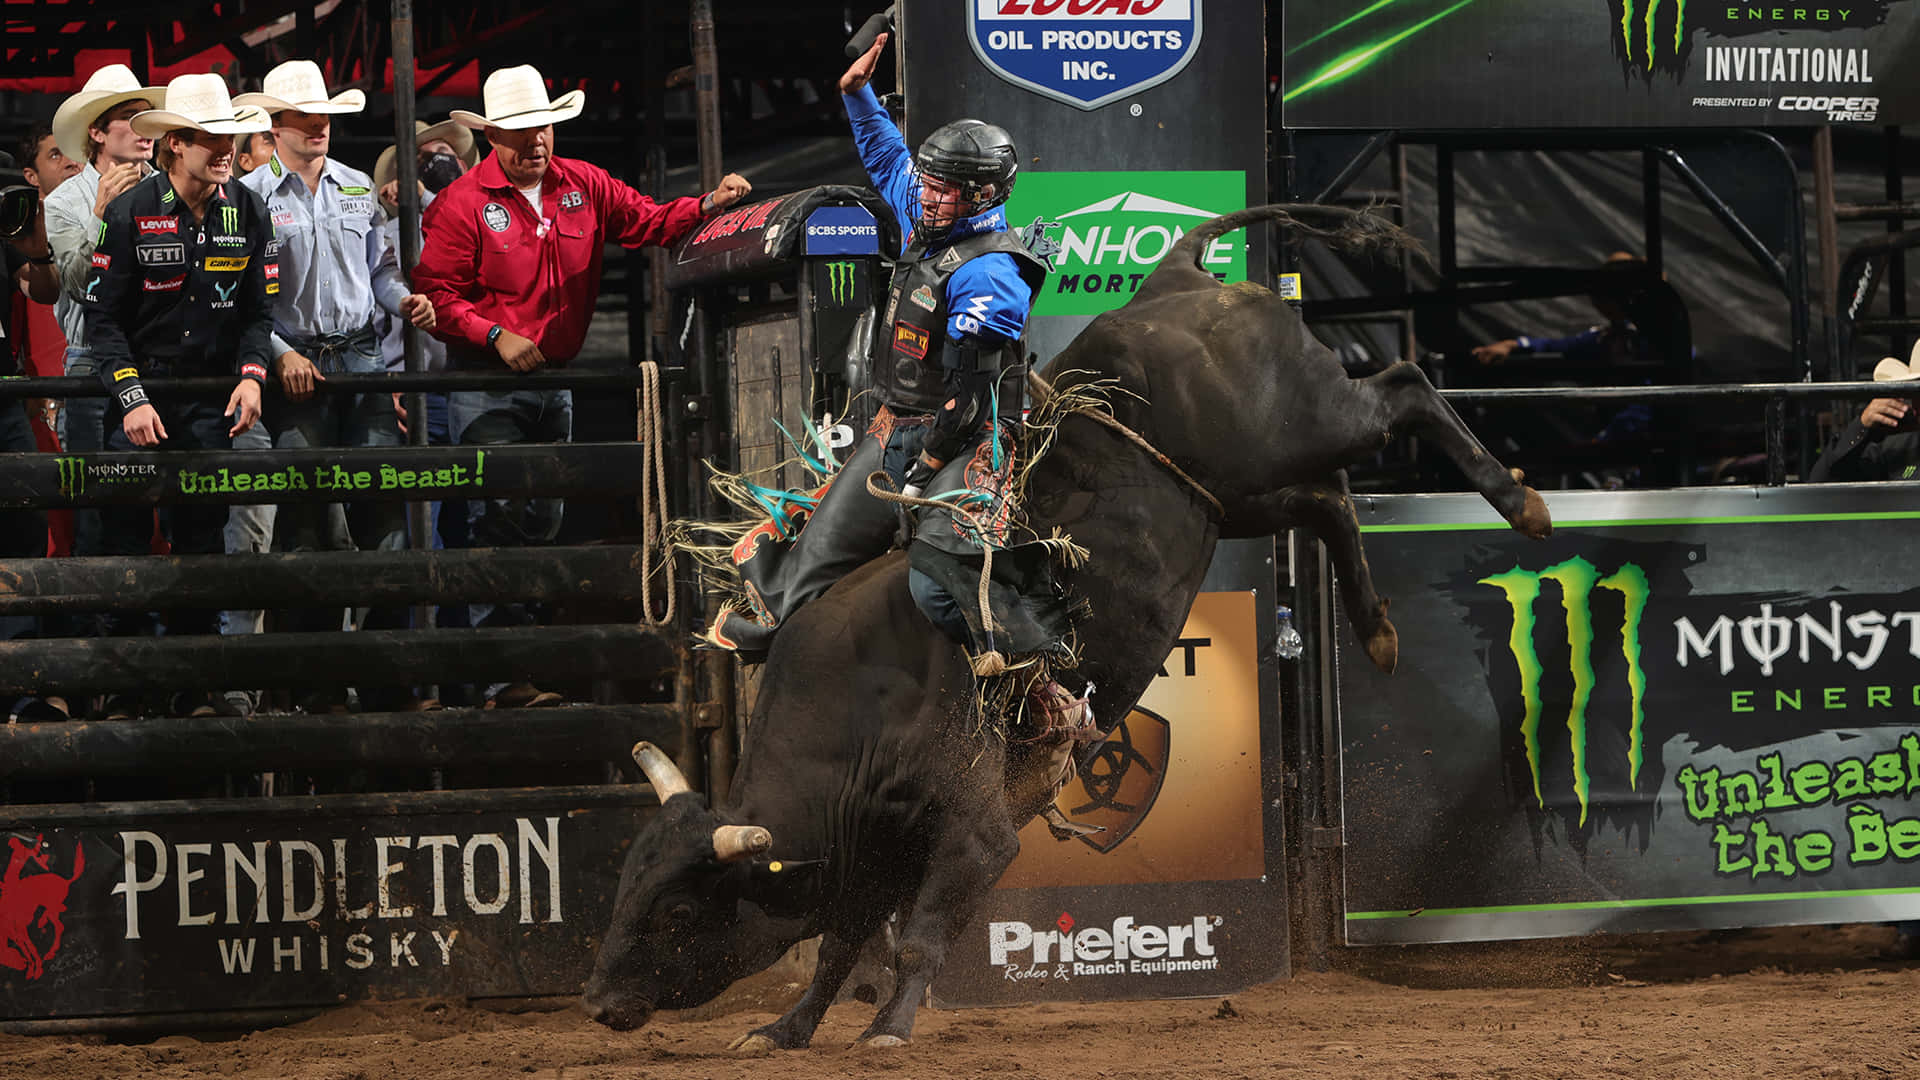 A Rodeo Rider Is Bucking His Bull In Front Of A Crowd